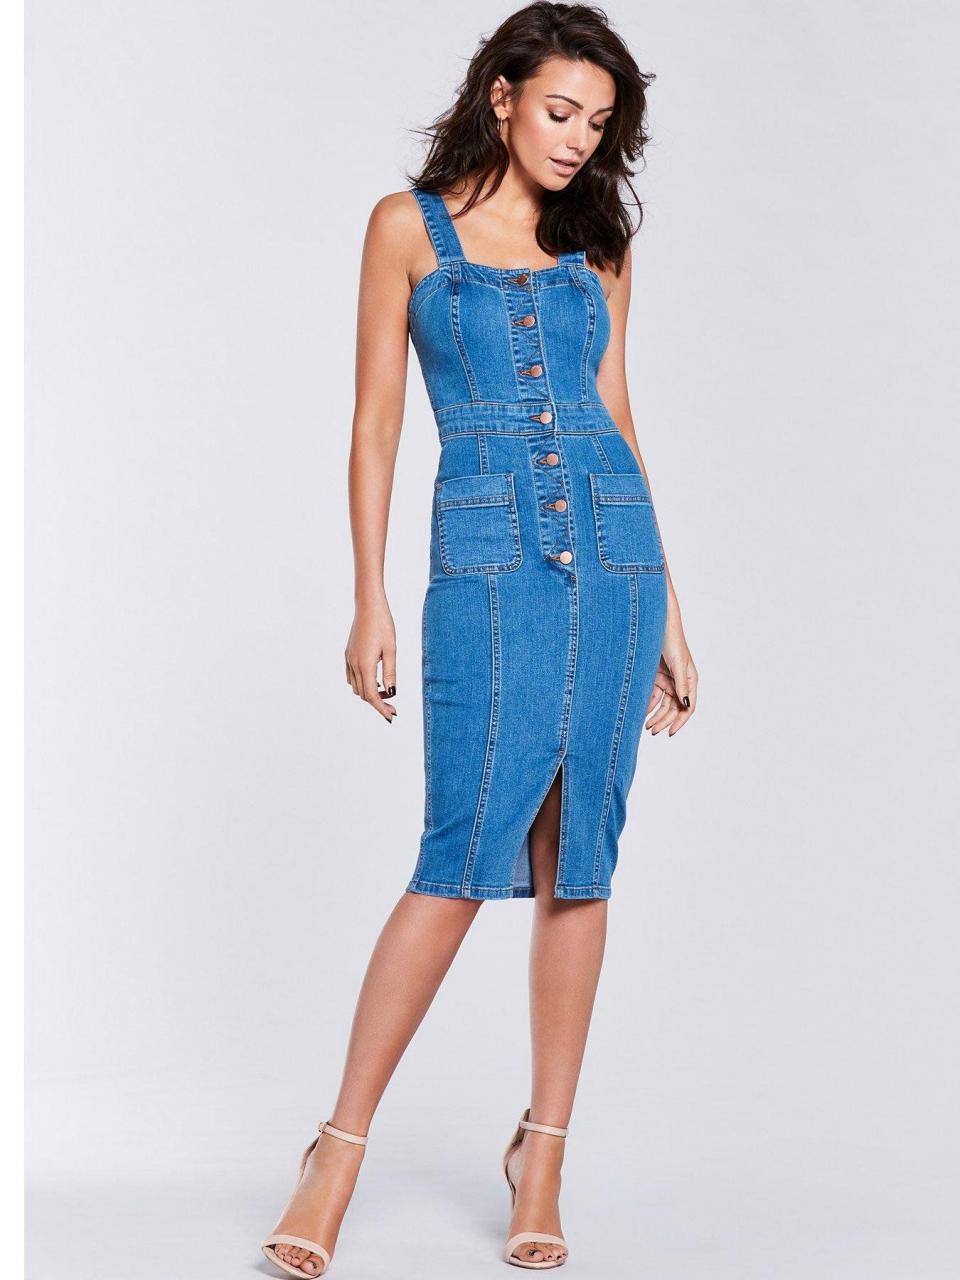 Michelle Keegan?s ?45 sell-out denim bodycon dress is back in stock? and is also in black picture: VERY METROGRAB